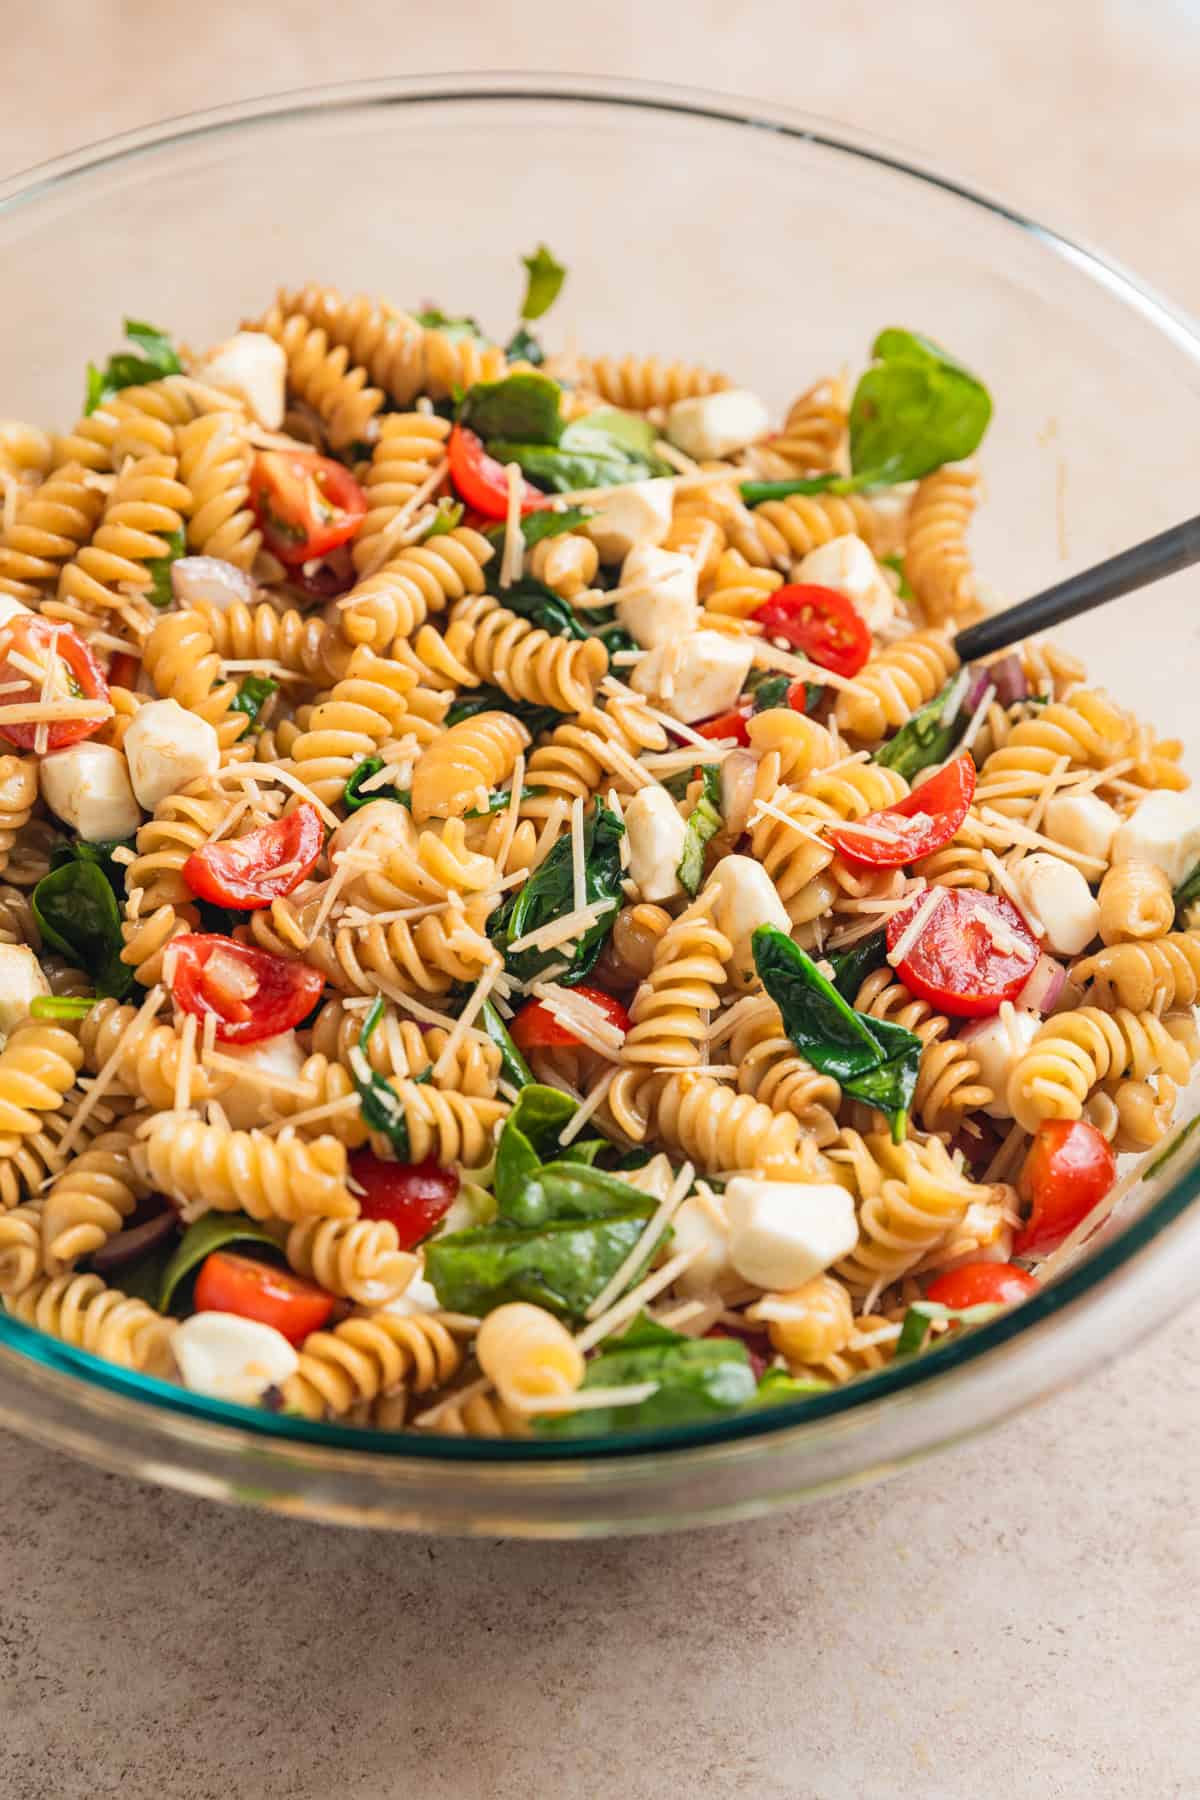 Pasta salad mixture tossed with dressing in bowl with spoon.